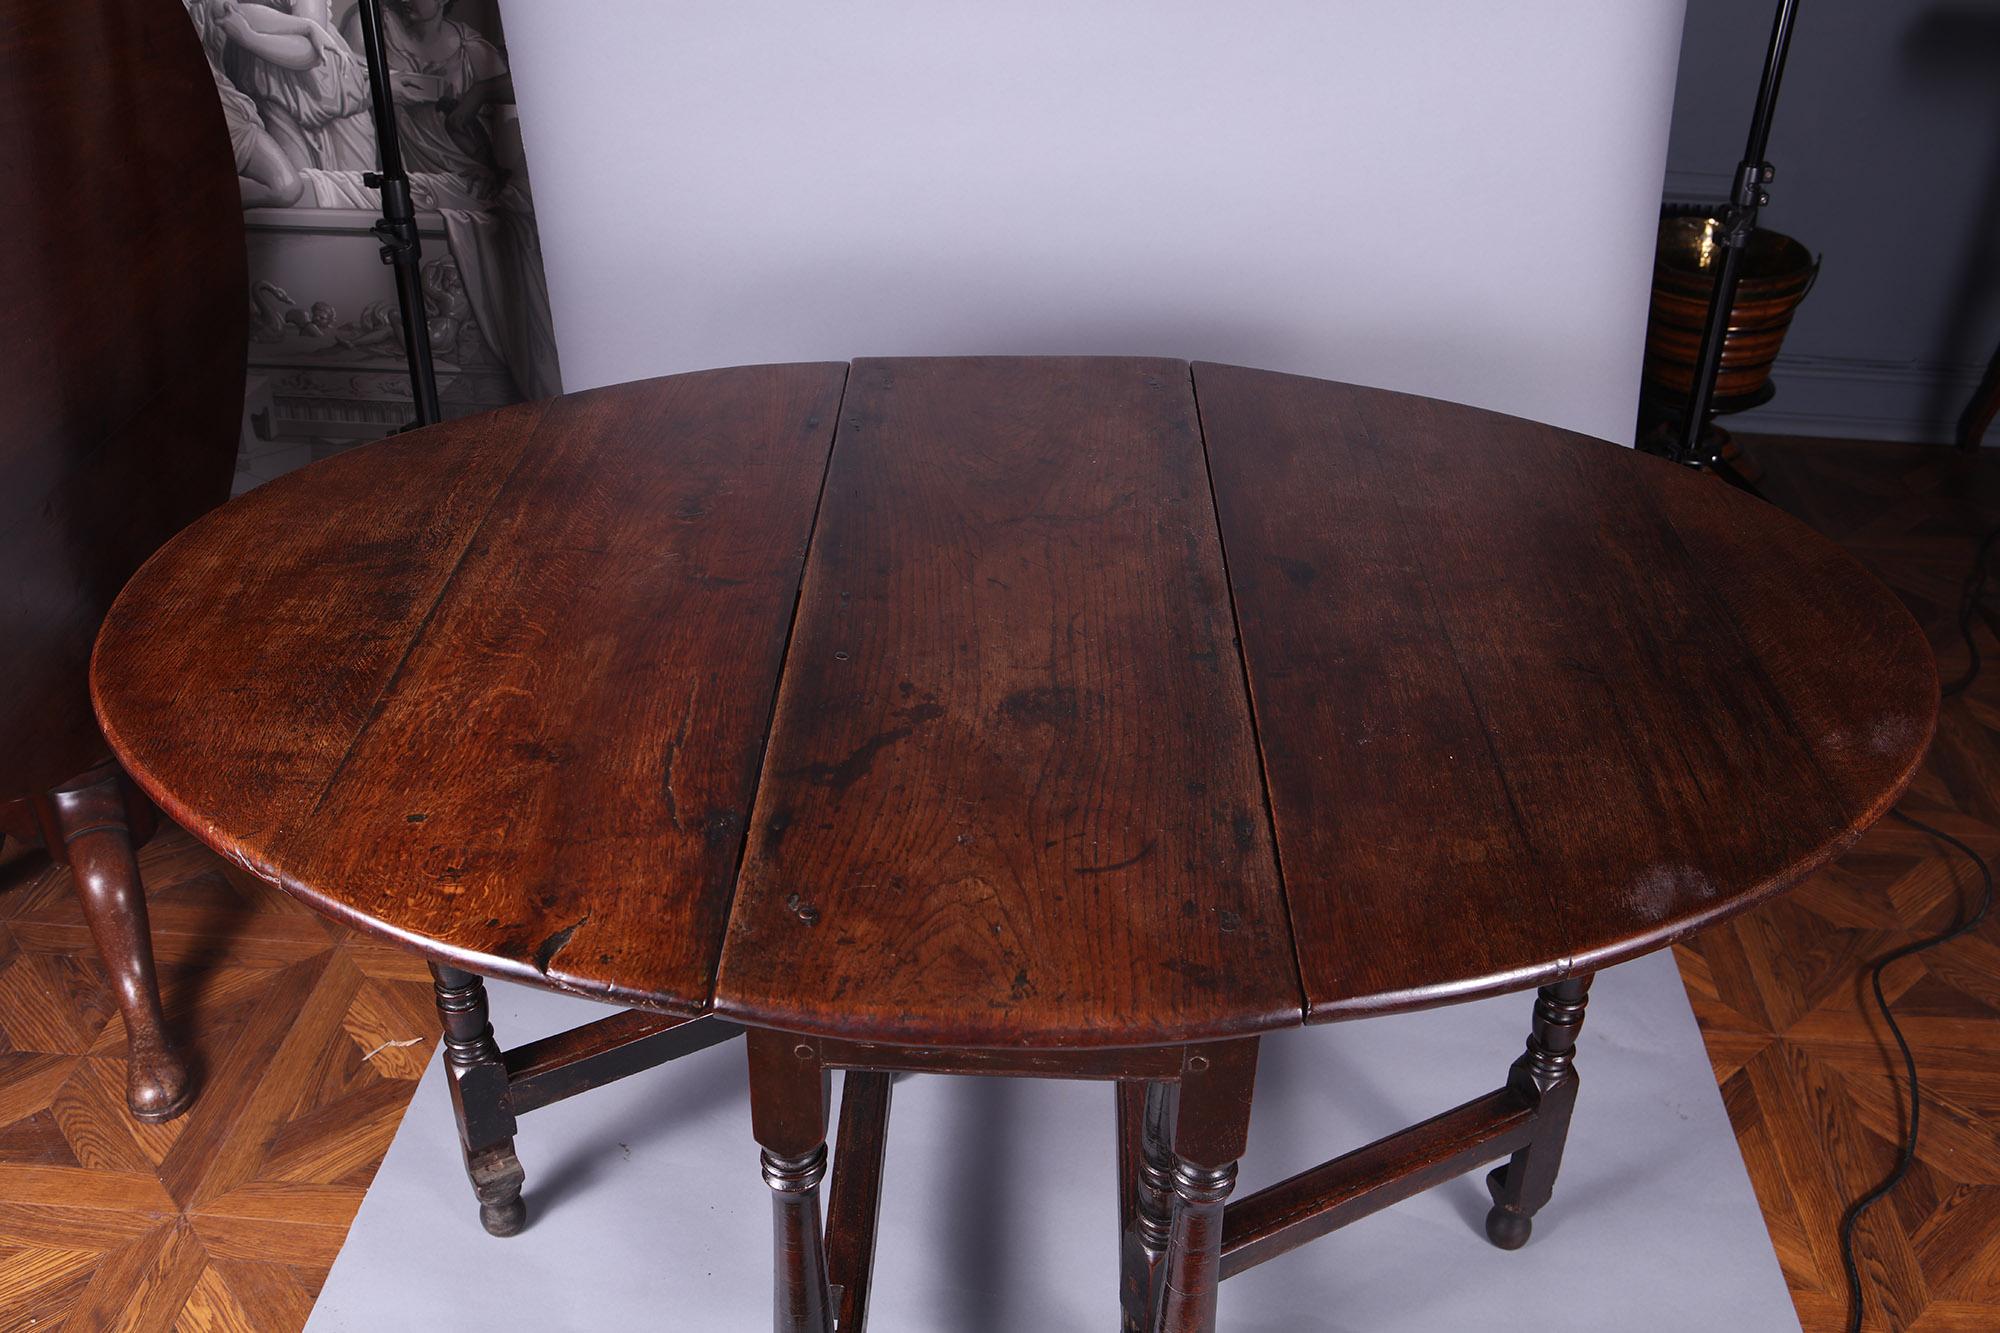 A 17th-century oak drop-leaf gate leg table, the central top of elm and the drop leaves in oak, raised on turned legs with stretchers.